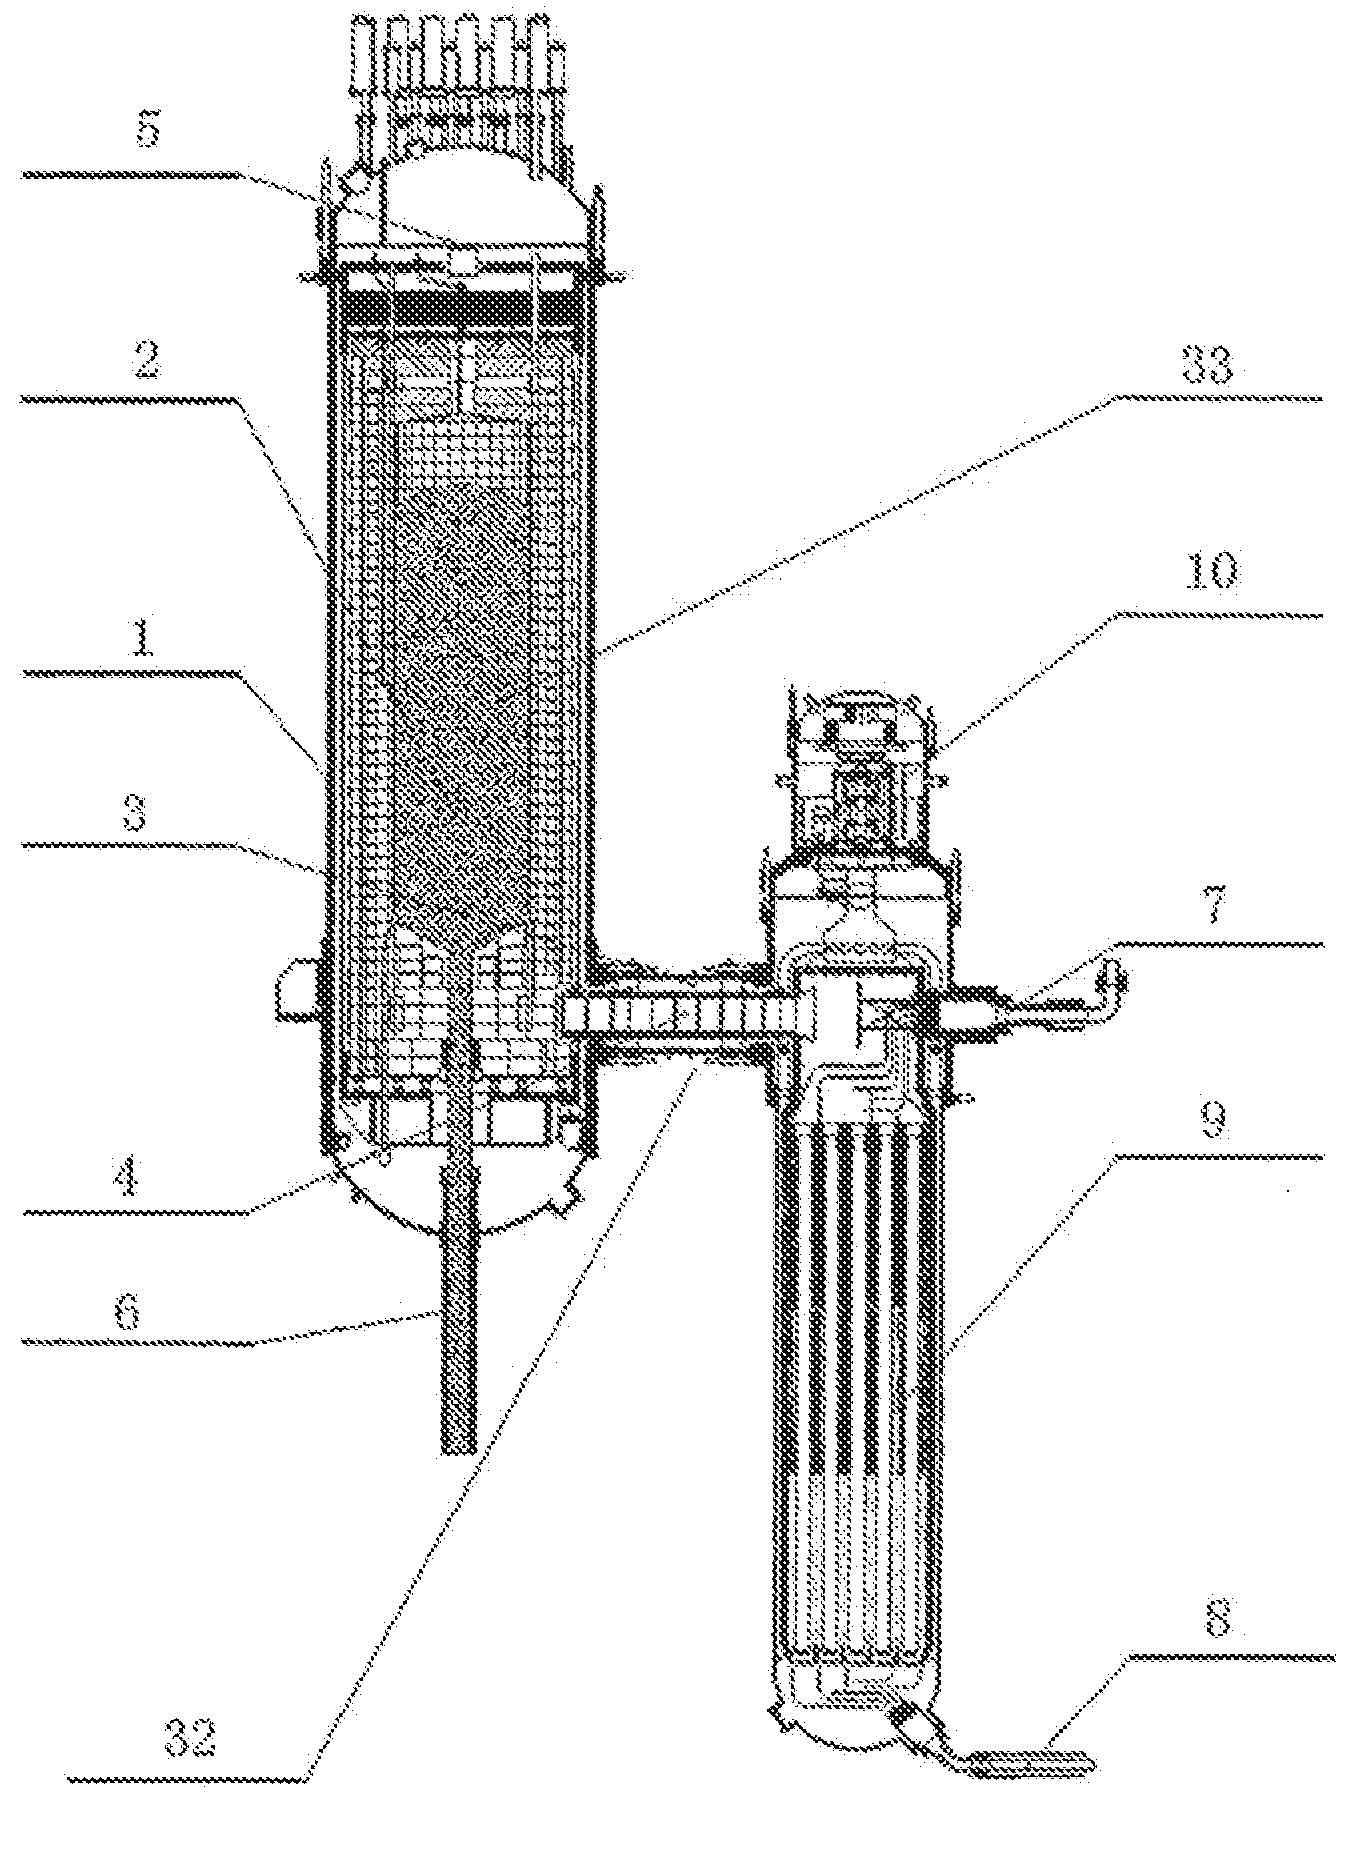 High-temperature gas-cooled reactor steam generating system and method